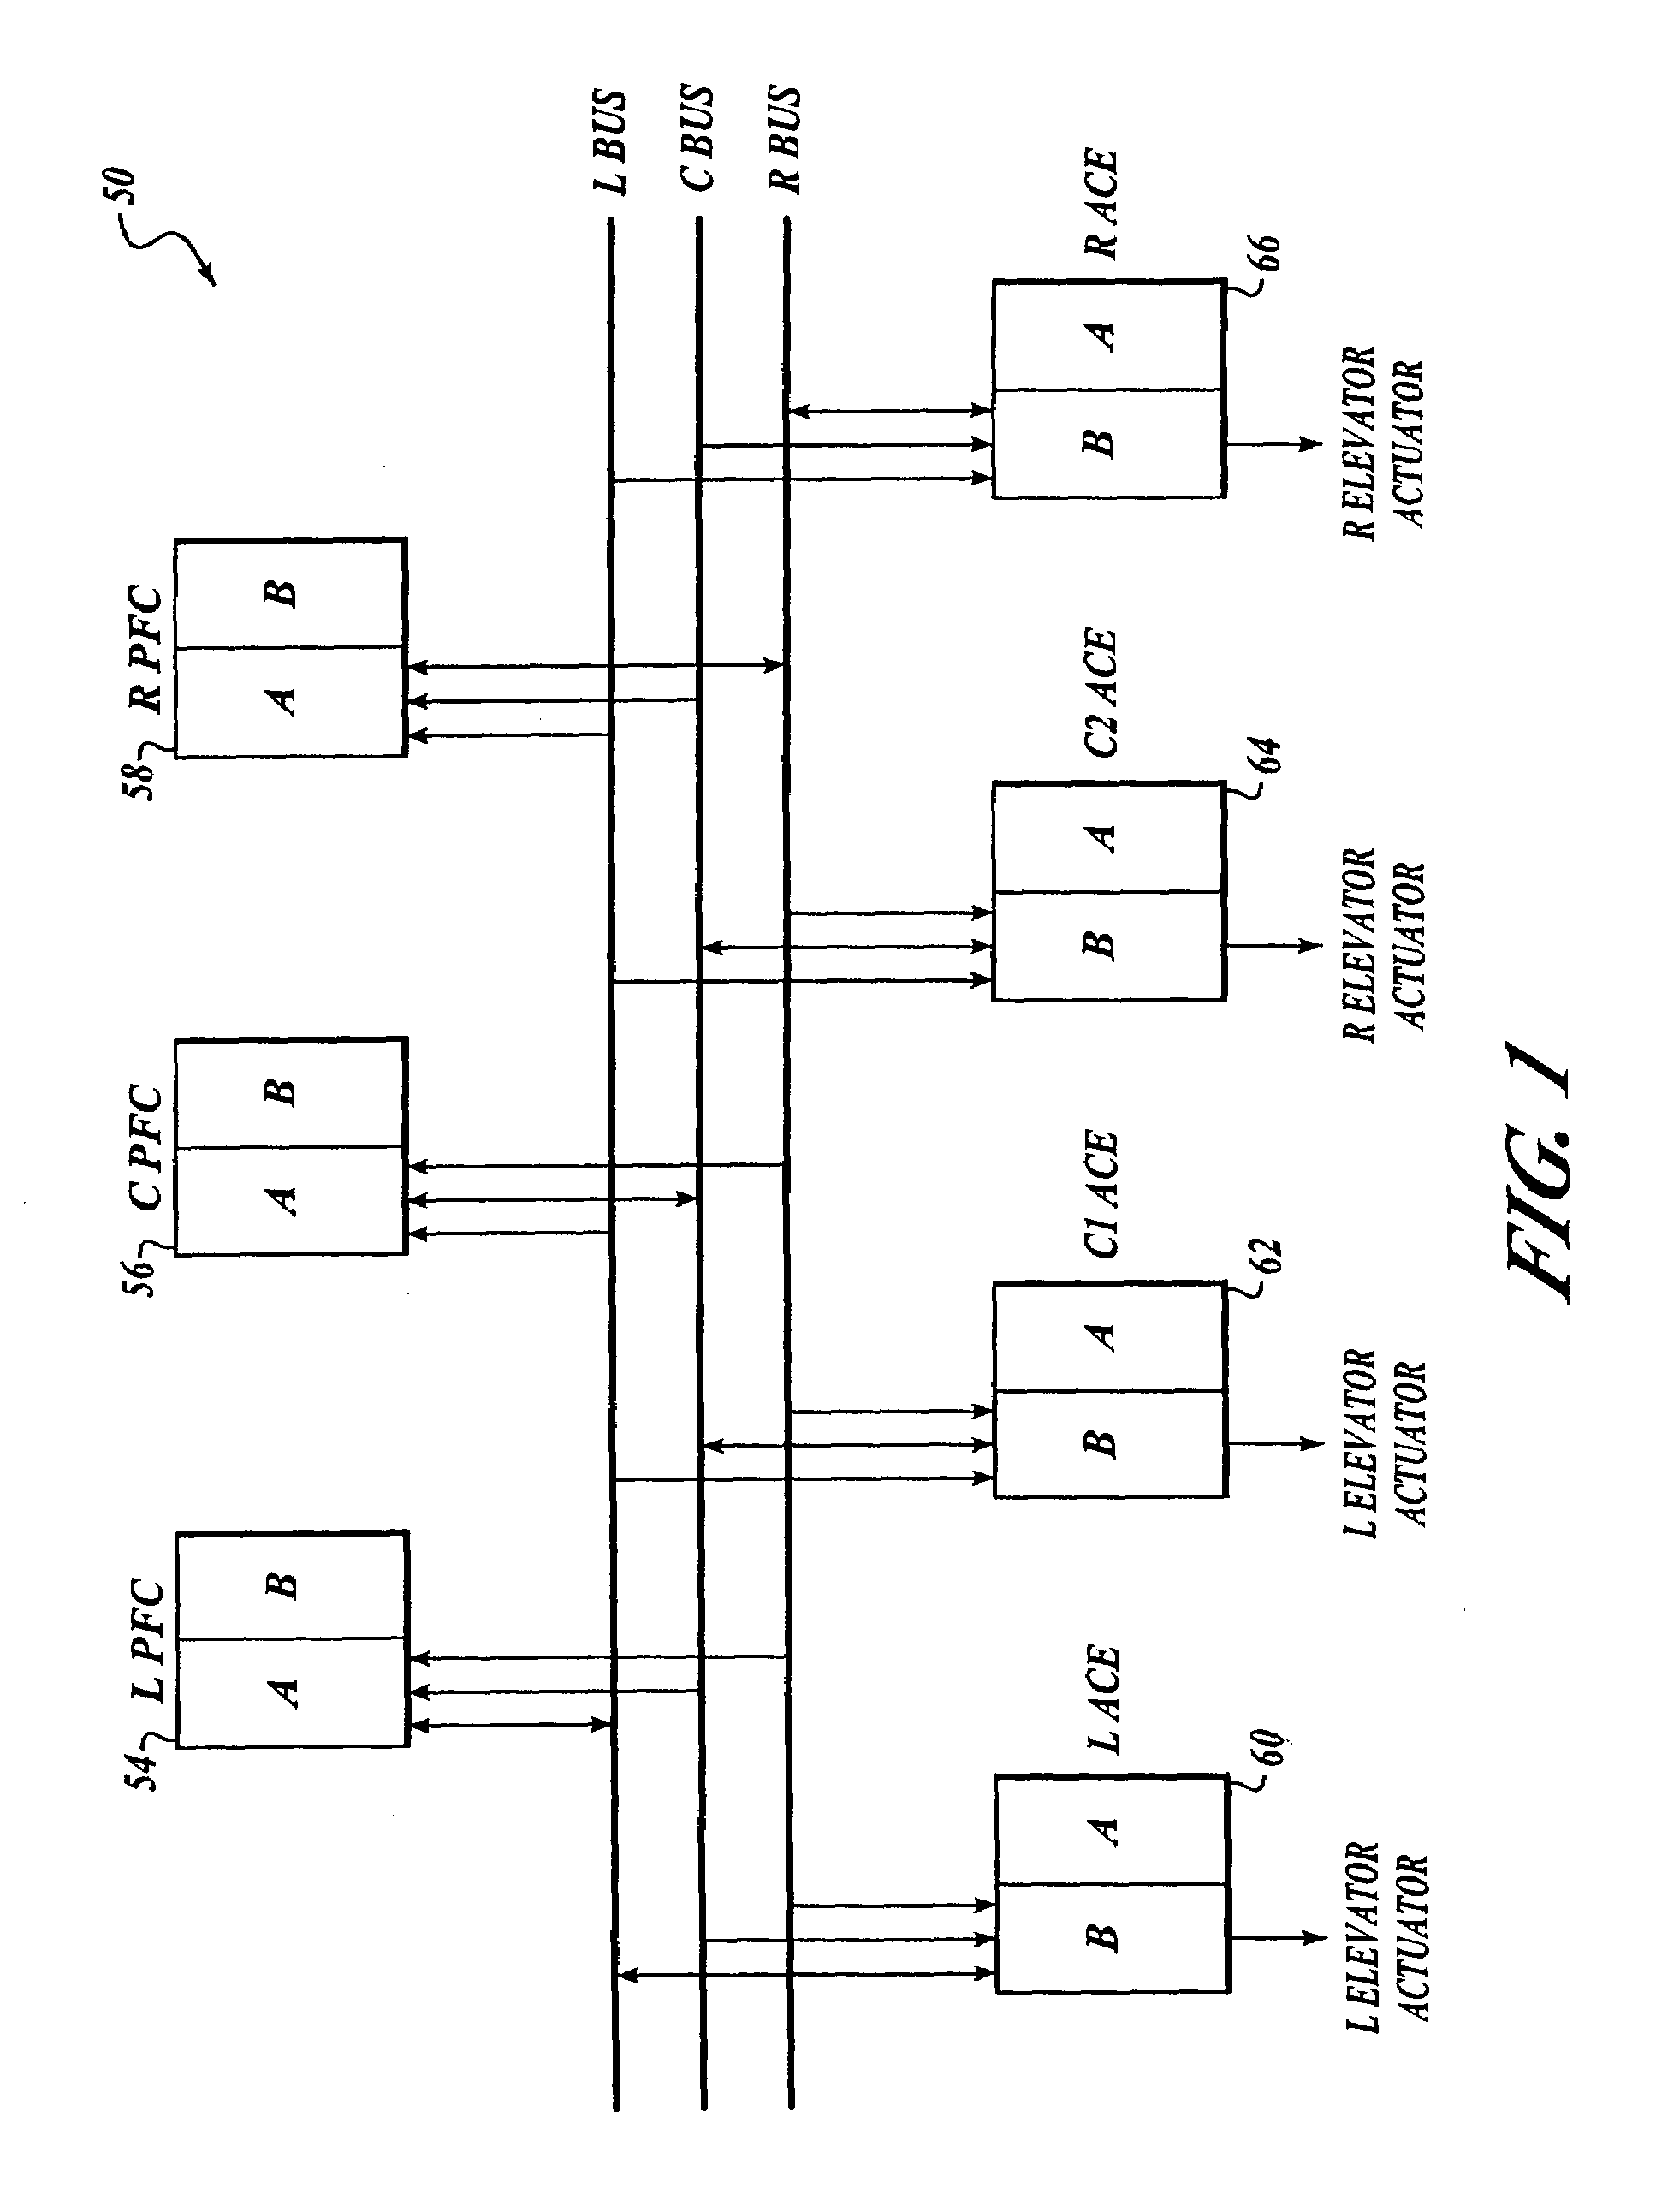 Method and apparatus for obtaining high integrity and availability in multi-channel systems